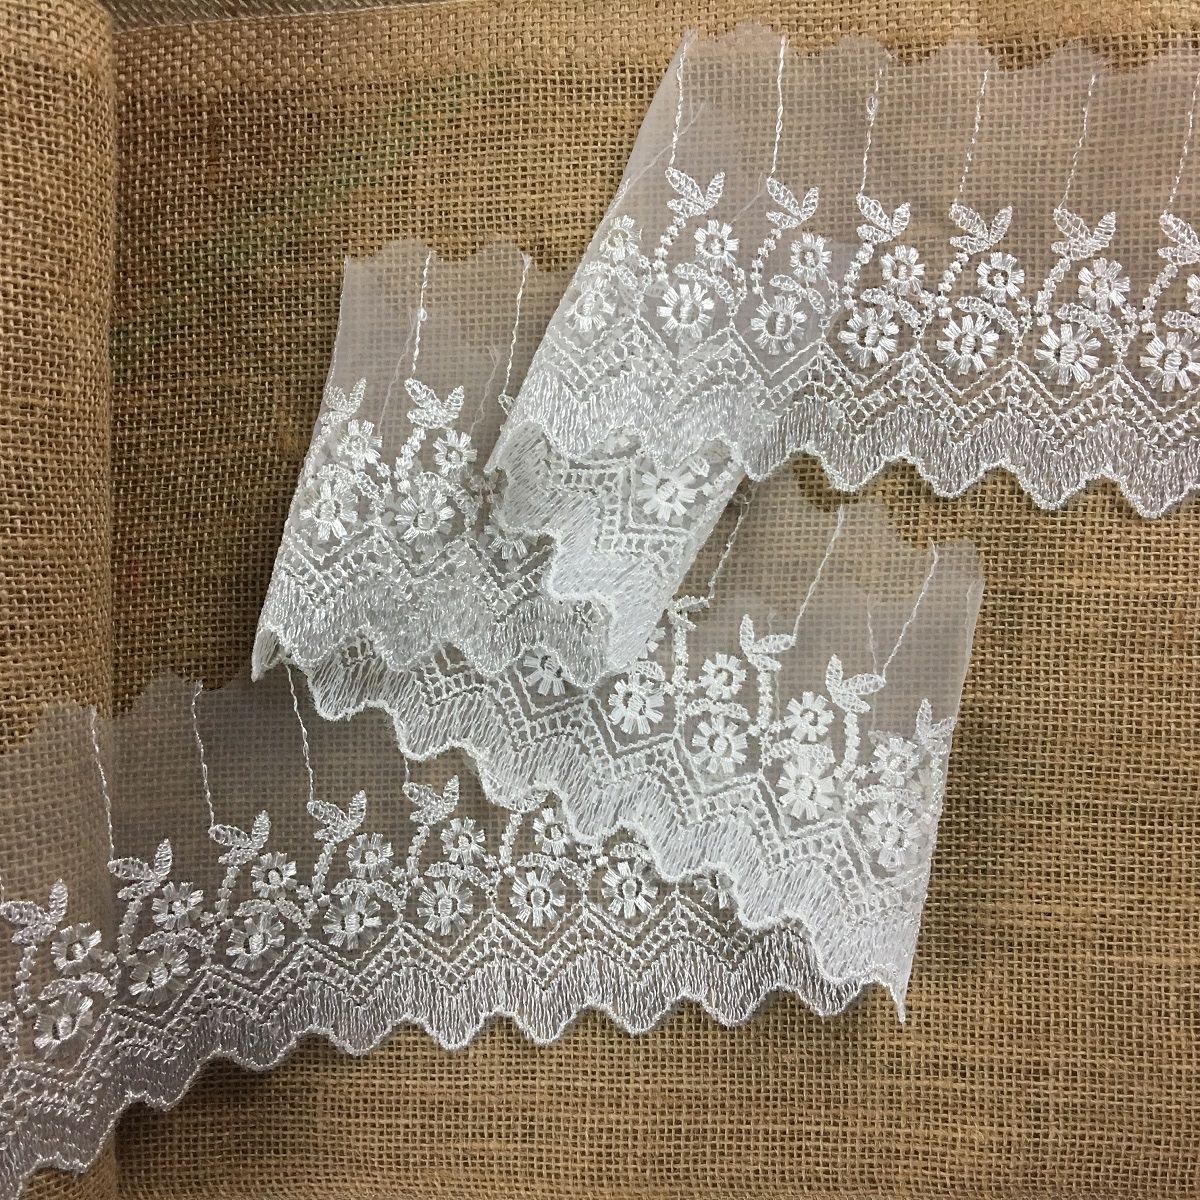 Lace Trim Scalloped Embroidered Sheer Organza, 2.5-4 Wide, Choose Color,  Multi-Use Garments Gowns Veils Bridal Communion Christening Costumes